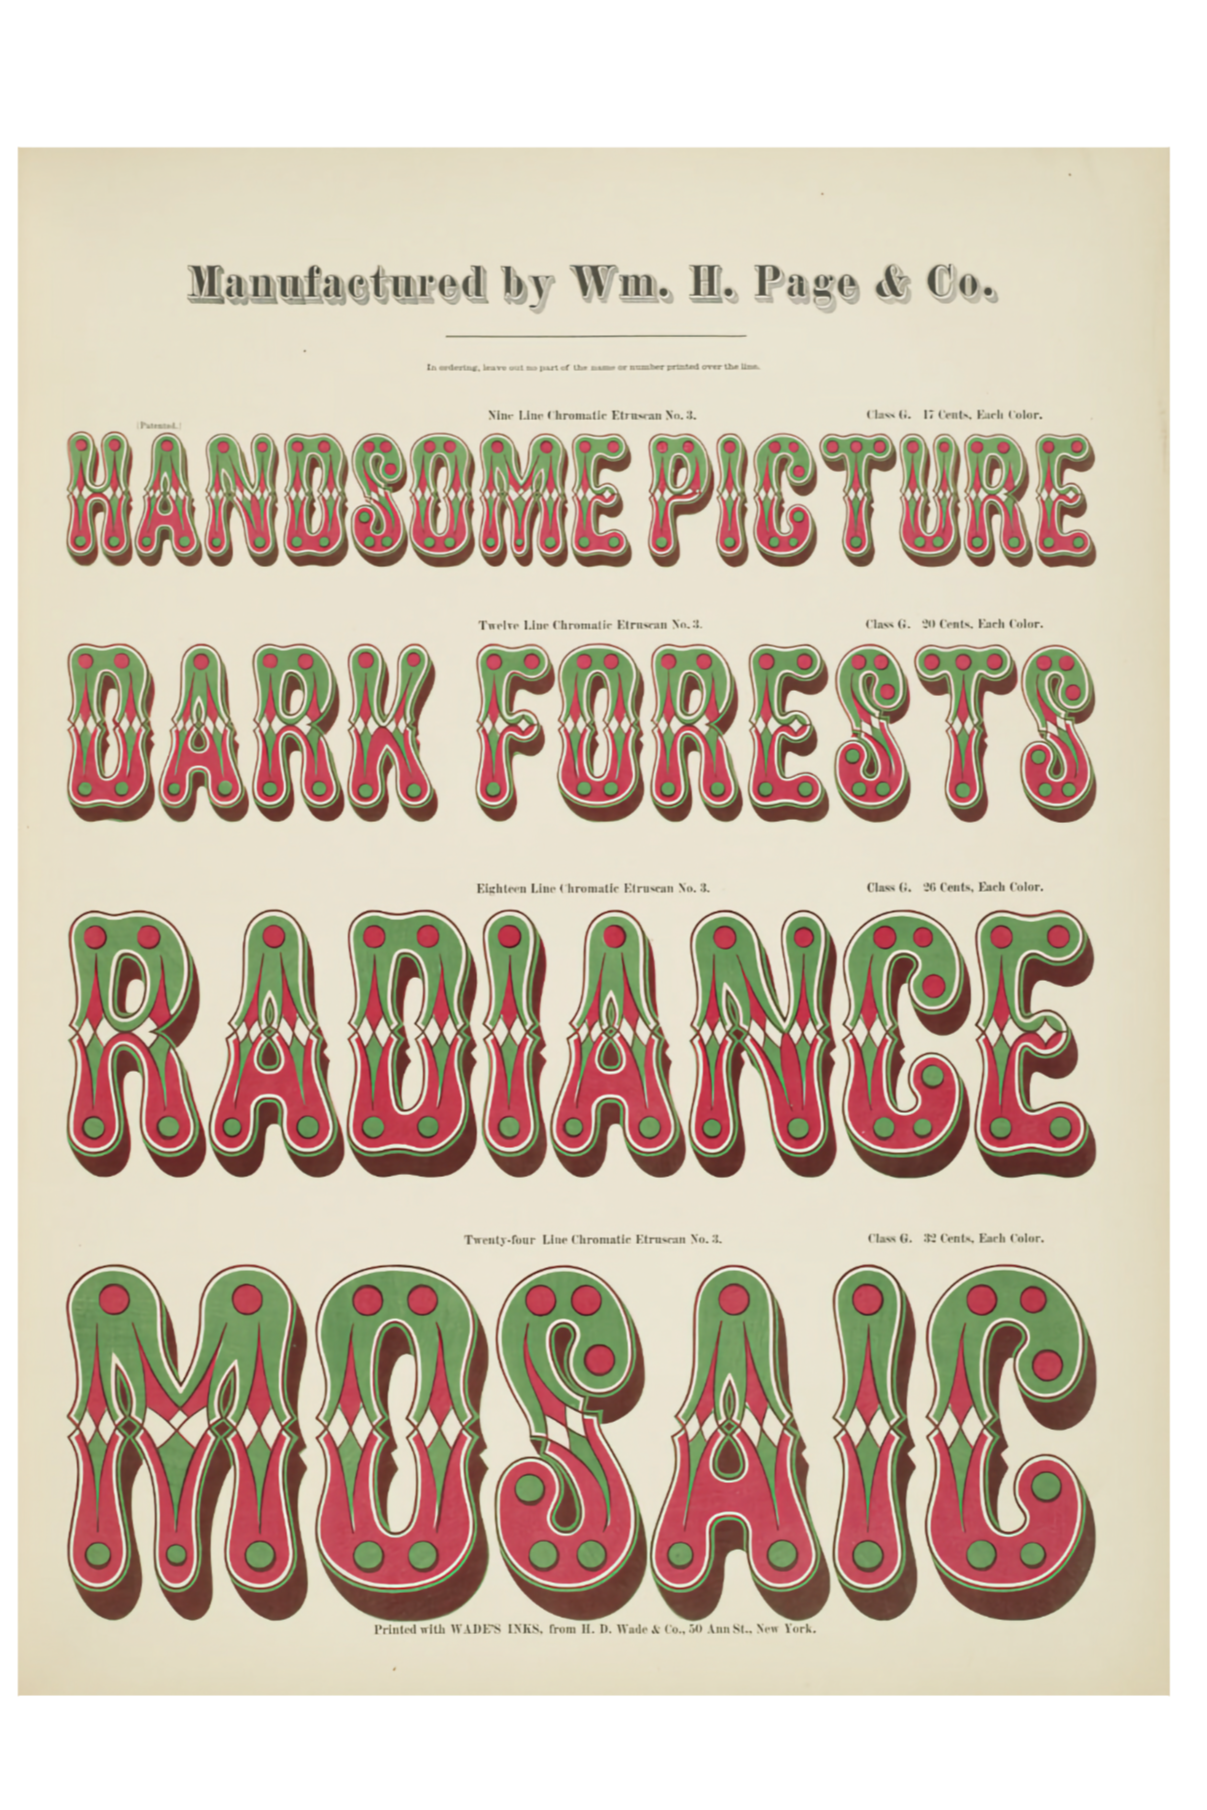 Handsome Picture, Dark Forests, Radiance, Mosaic, 1874 - Wm. H. Page & Co Chromatic Wood Type - Postcard